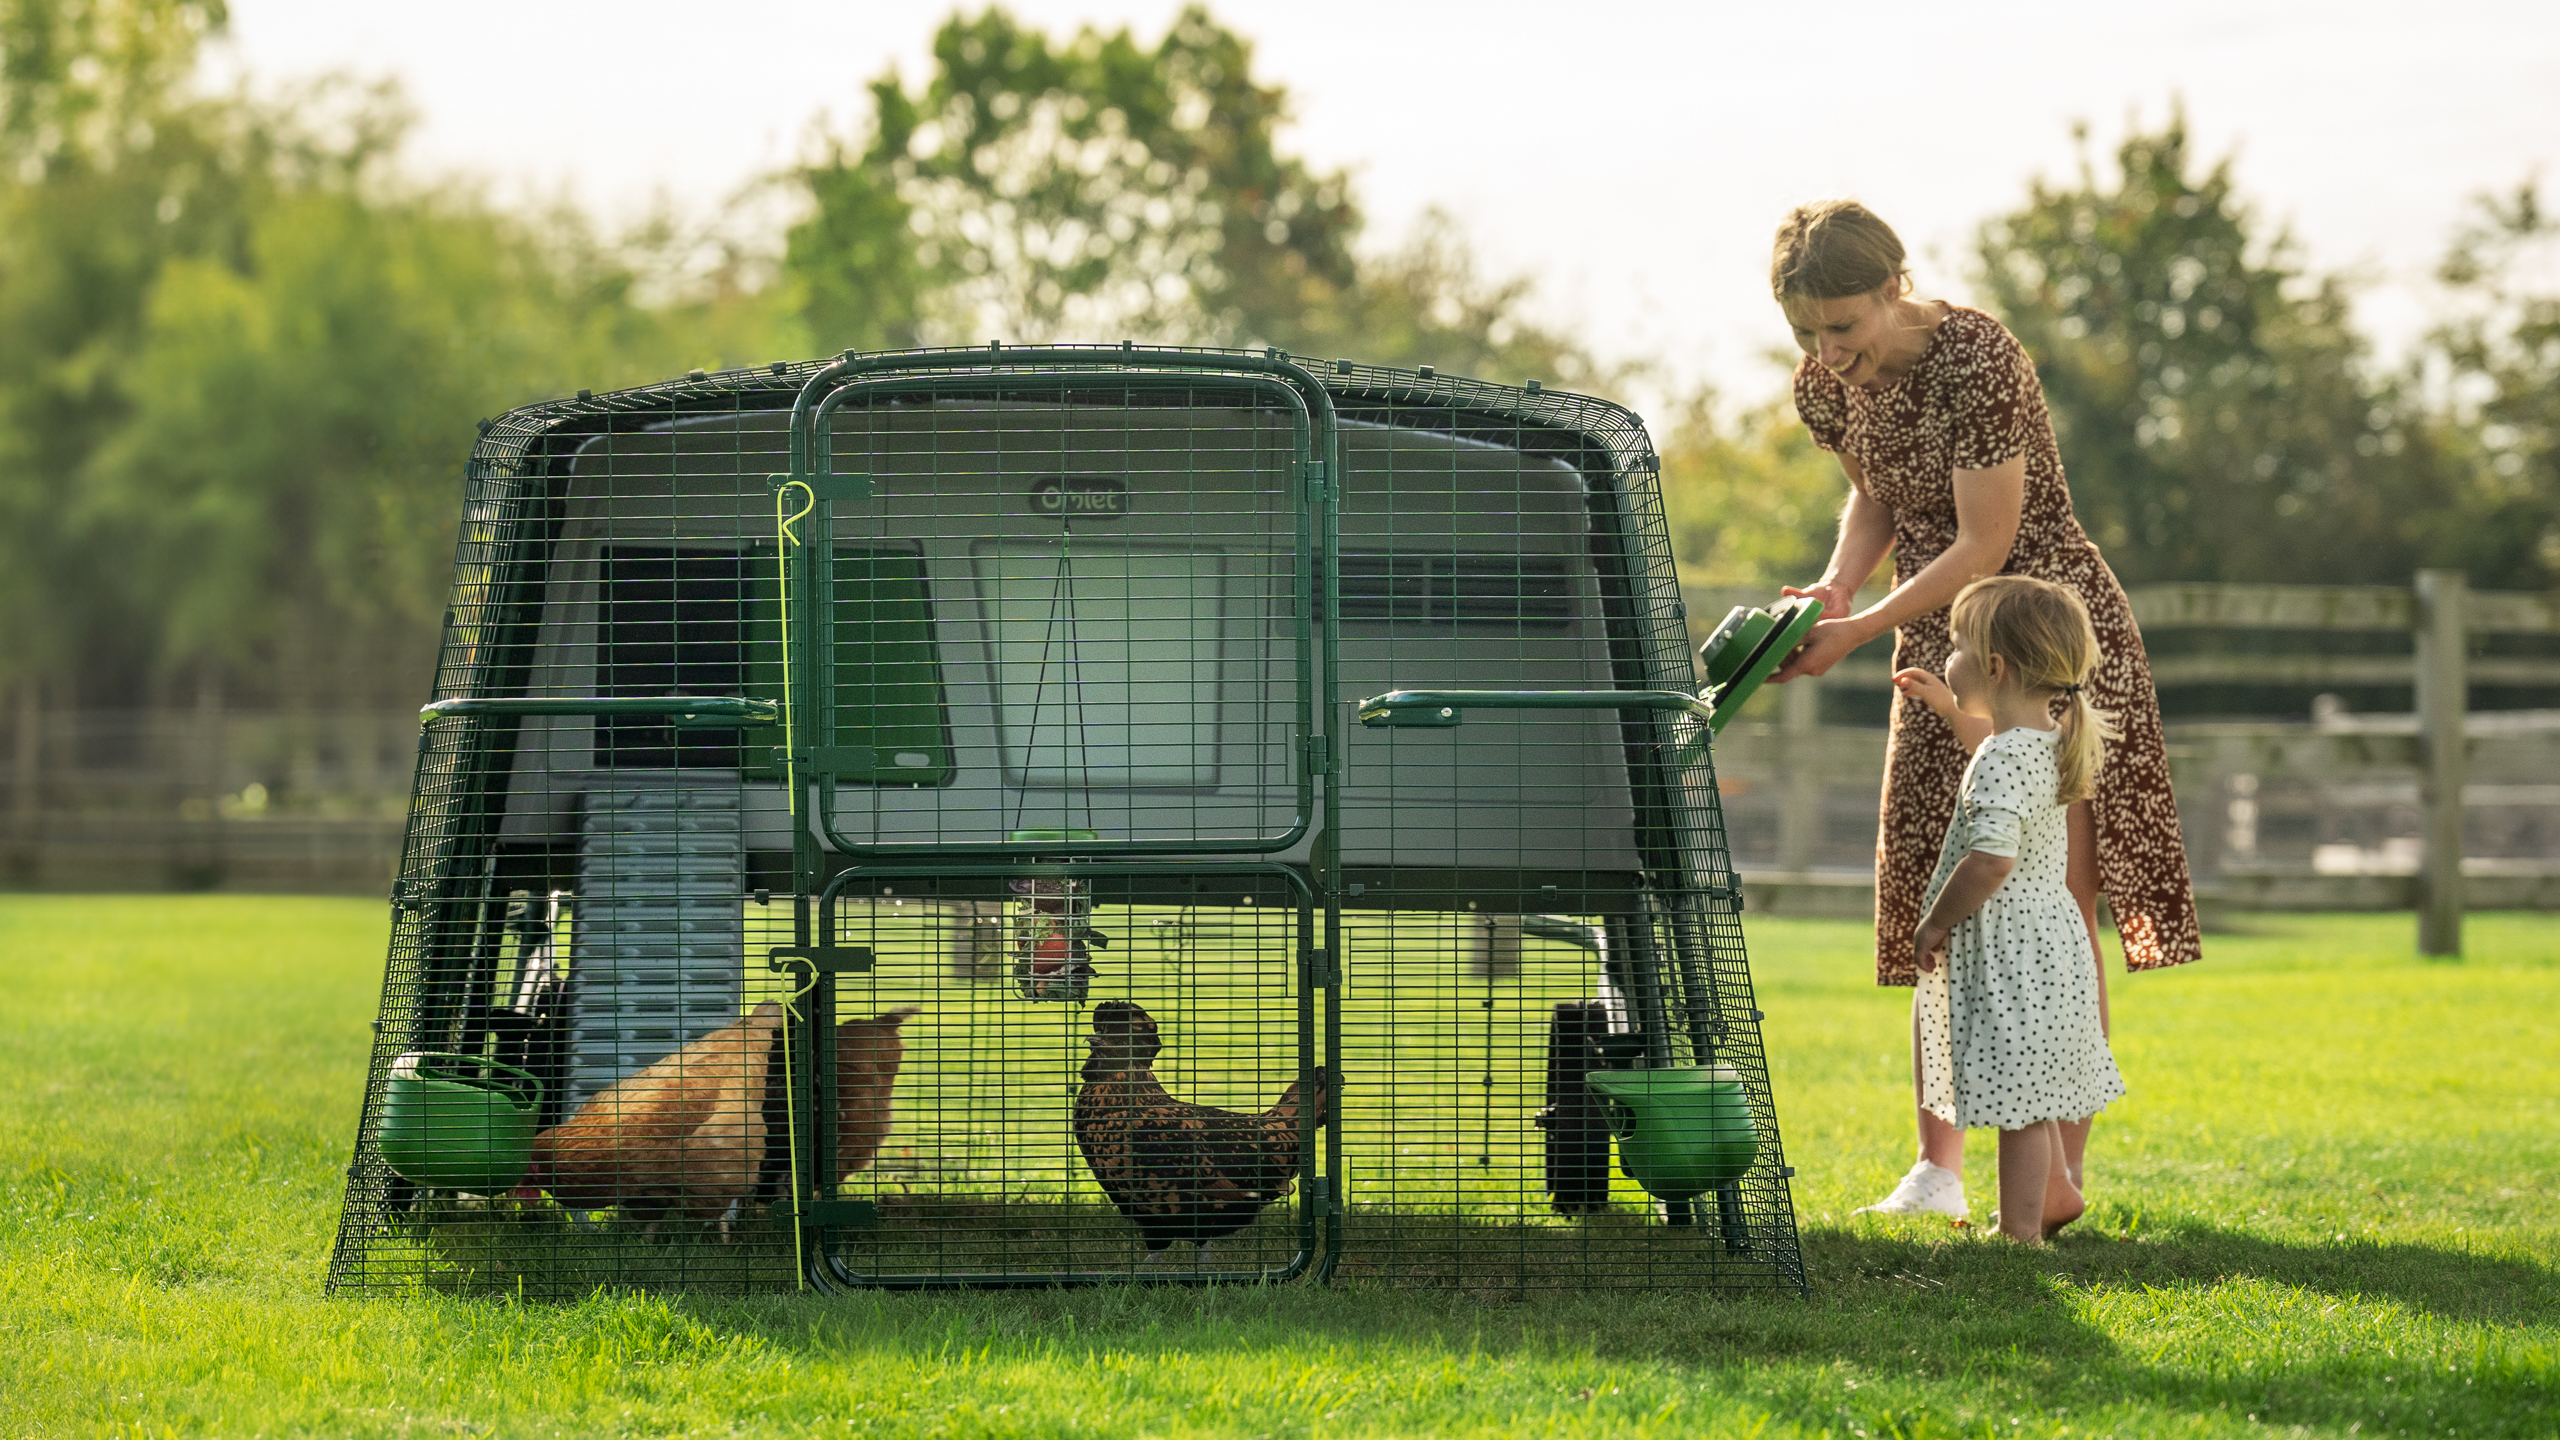 Mother and daughter tending to flock in the Omlet Eglu Pro Chicken Coop